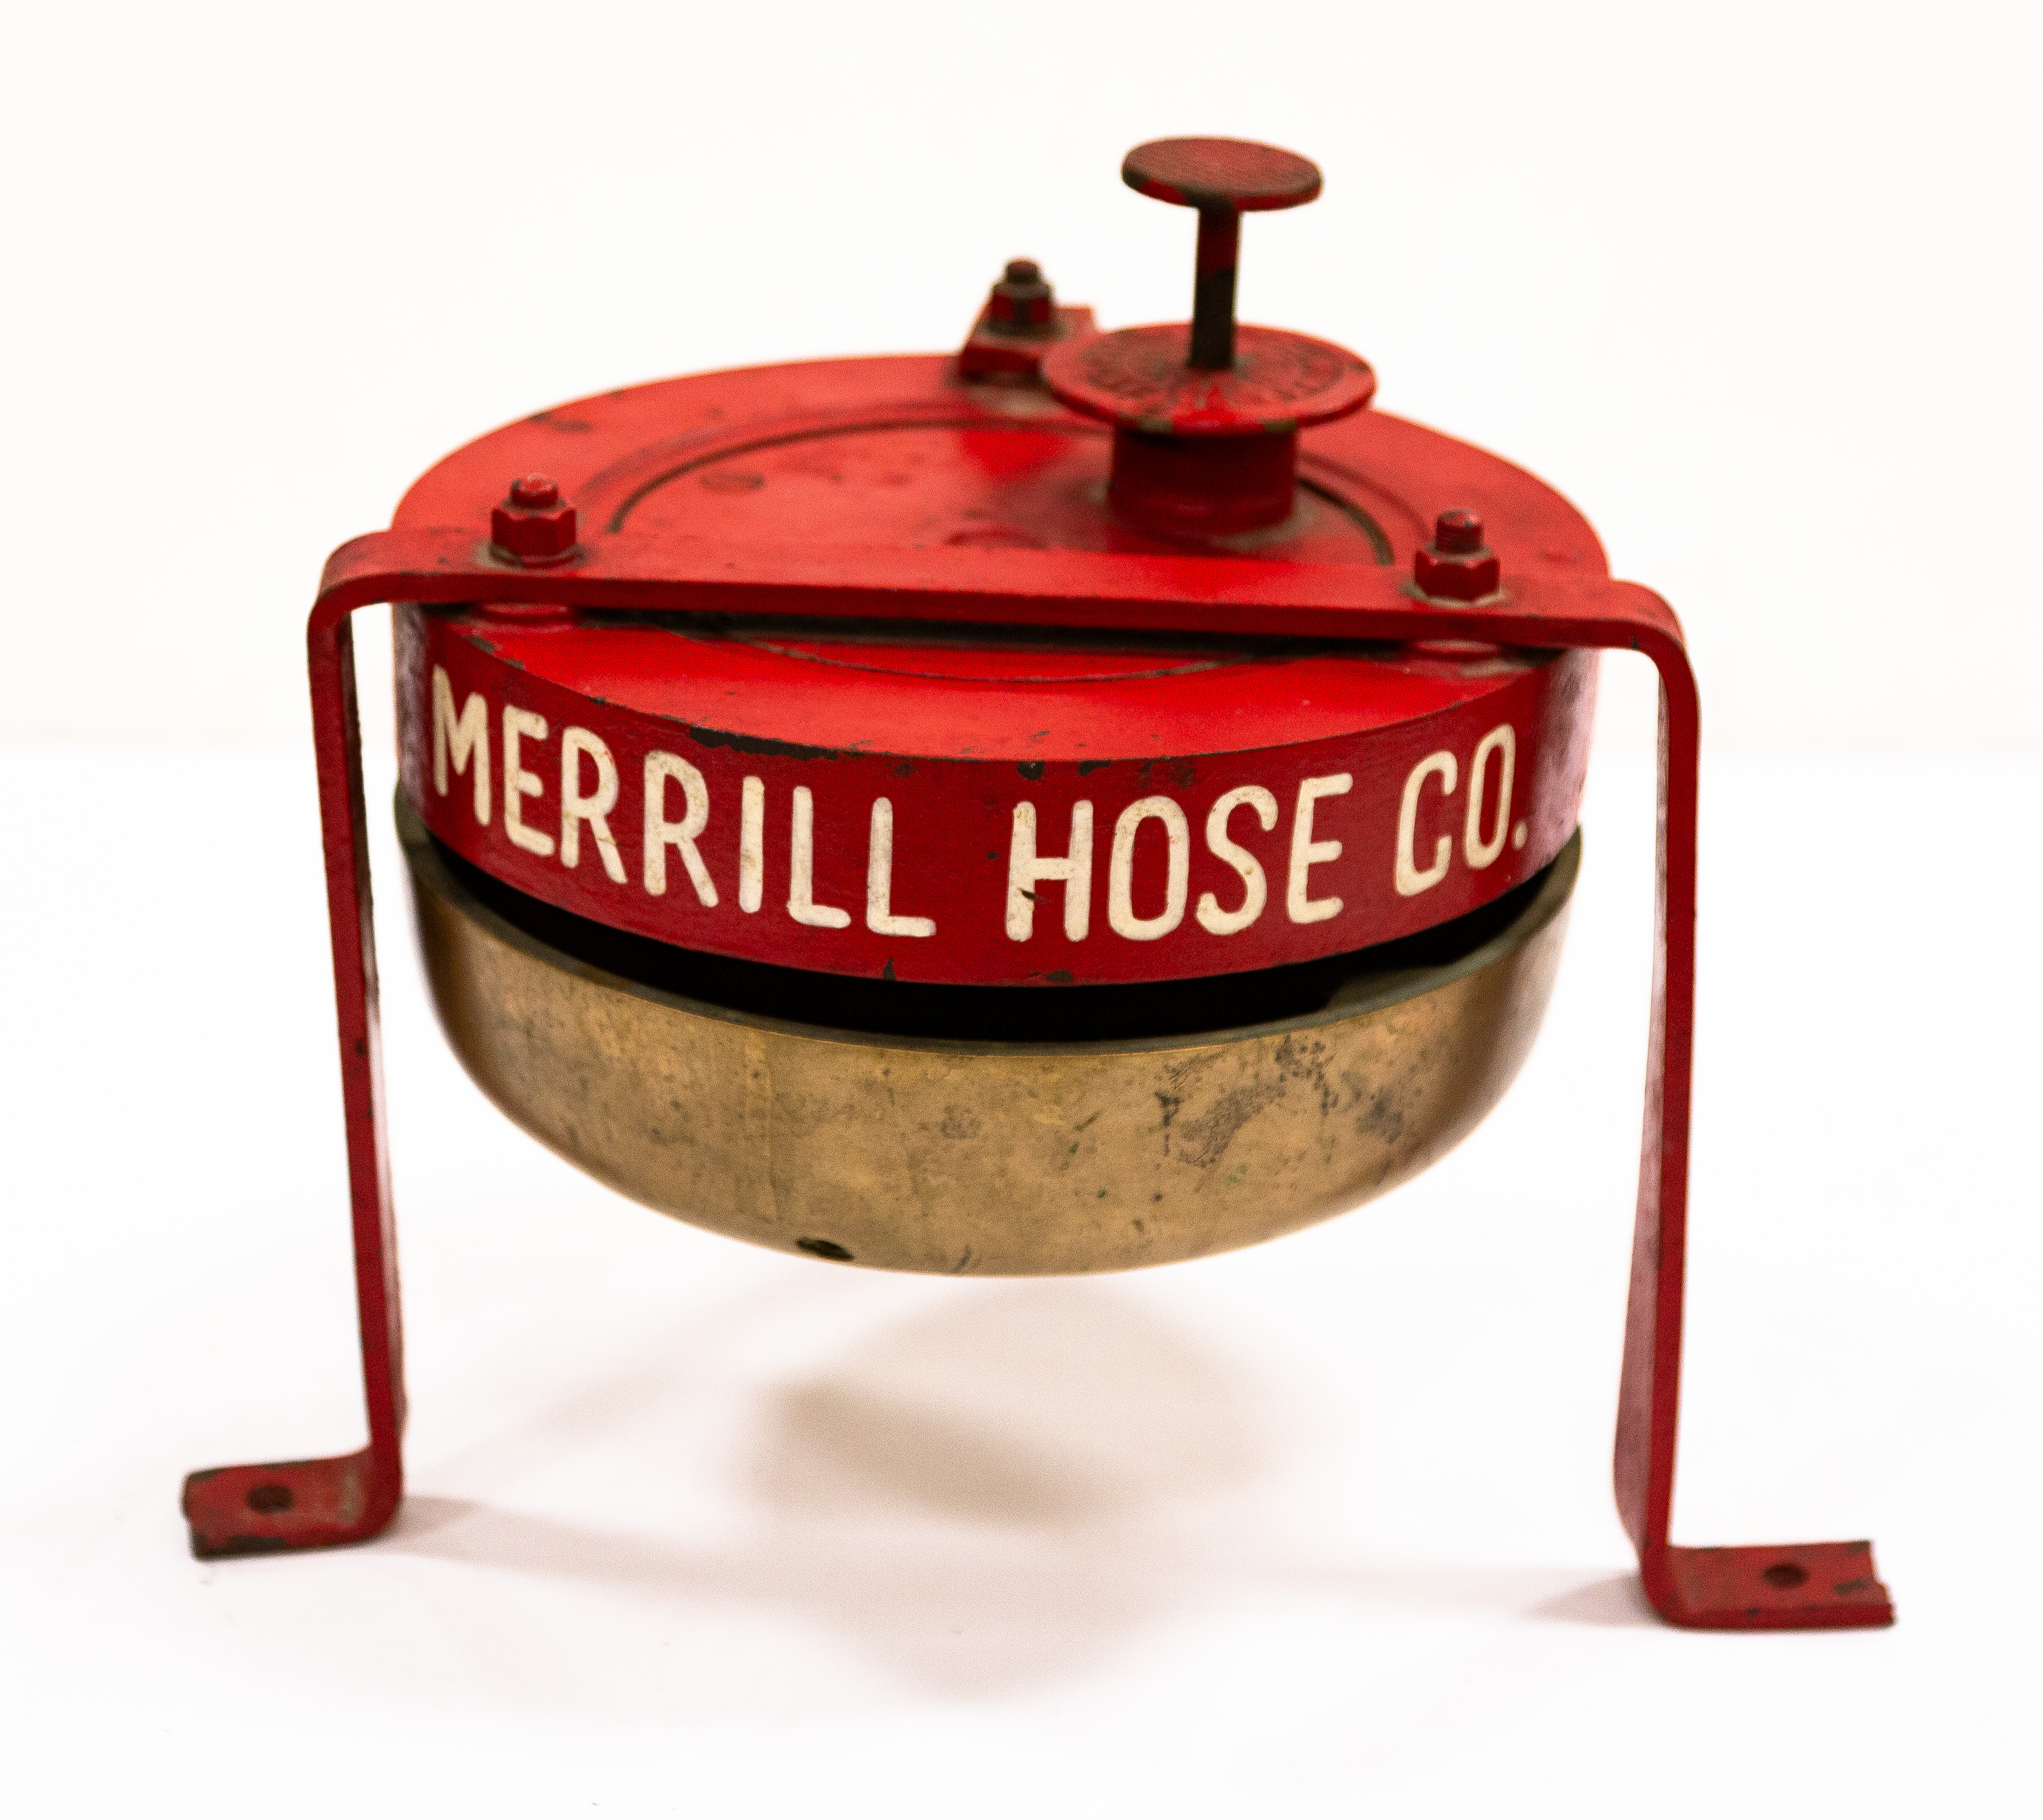 MERRILL HOSE CO. Cast iron with